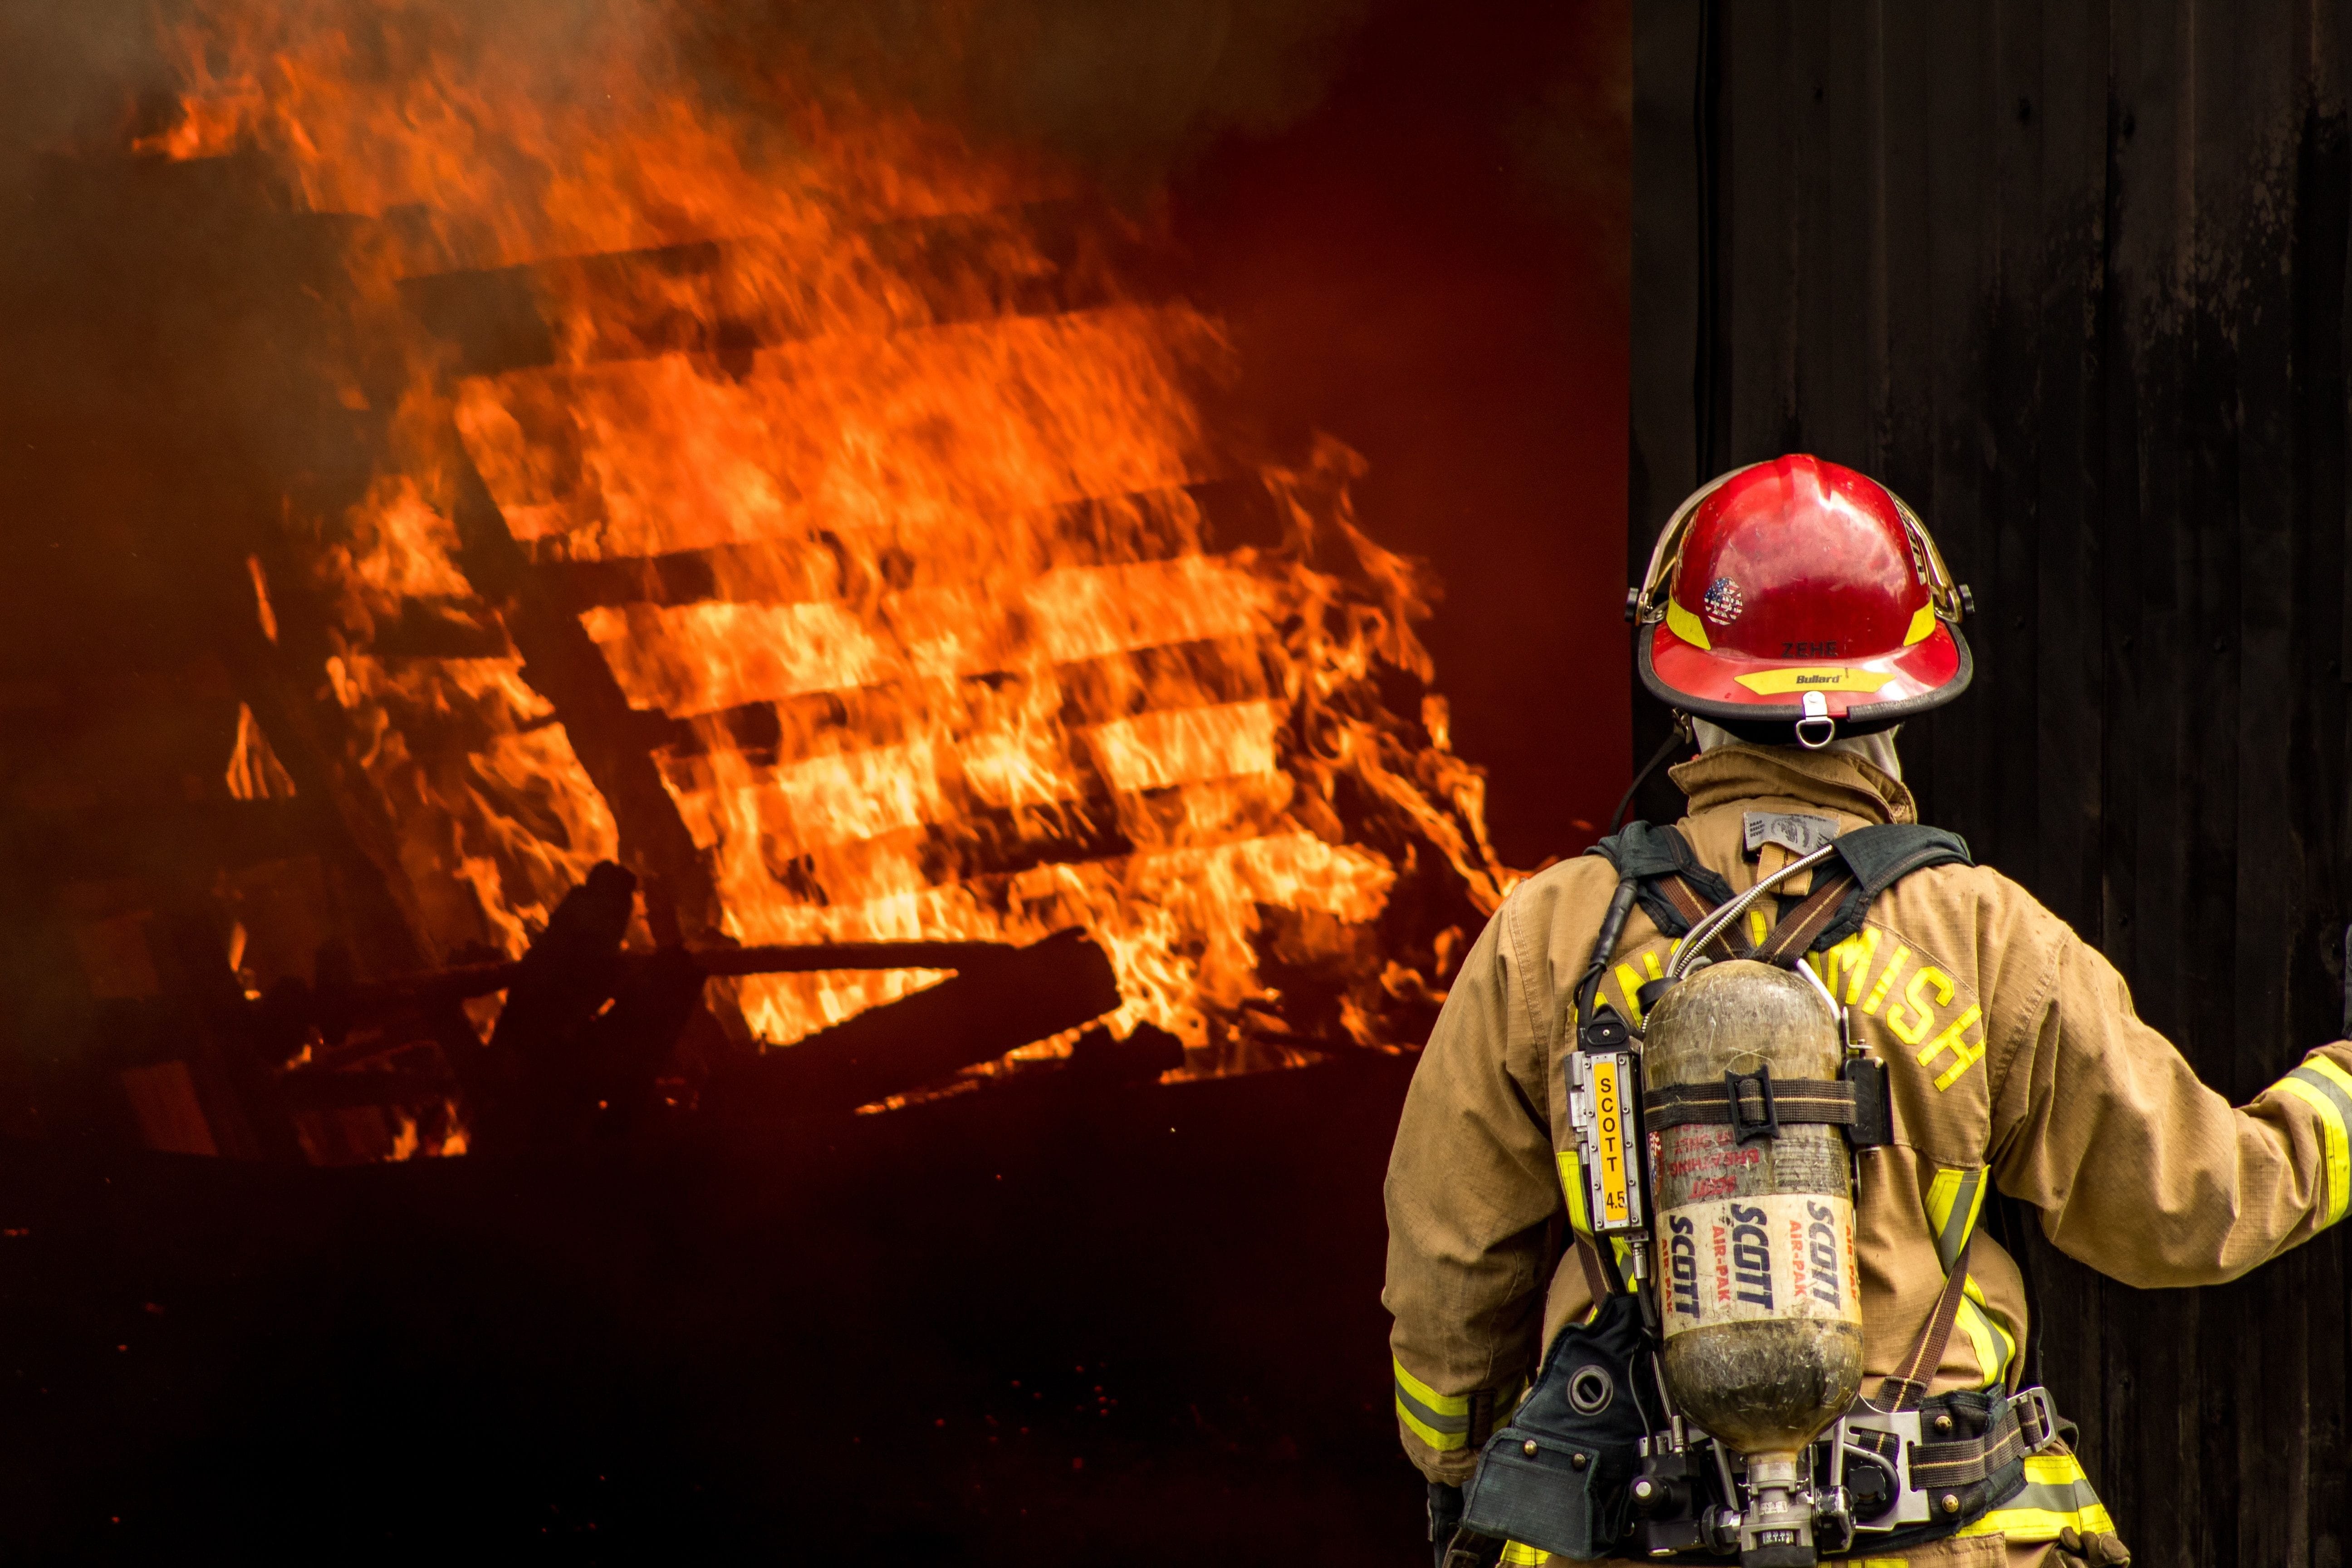 Picture is of first responders at a fire. Fire Alarms can alert occupants and save lives.